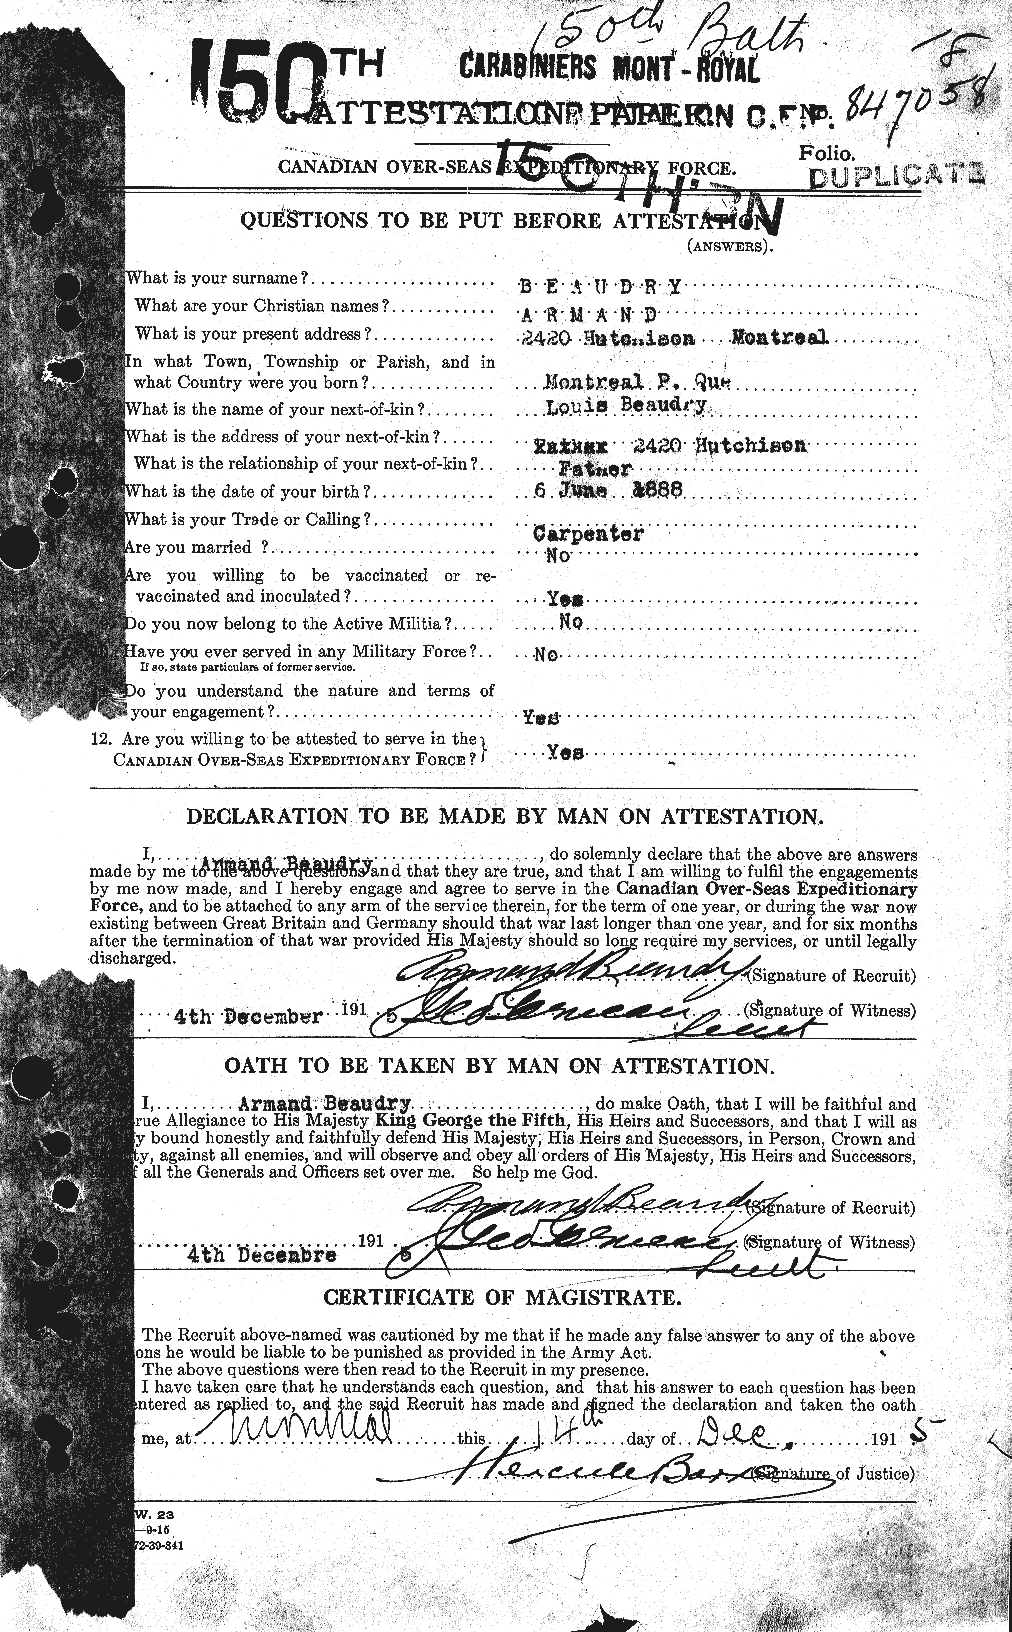 Personnel Records of the First World War - CEF 231335a